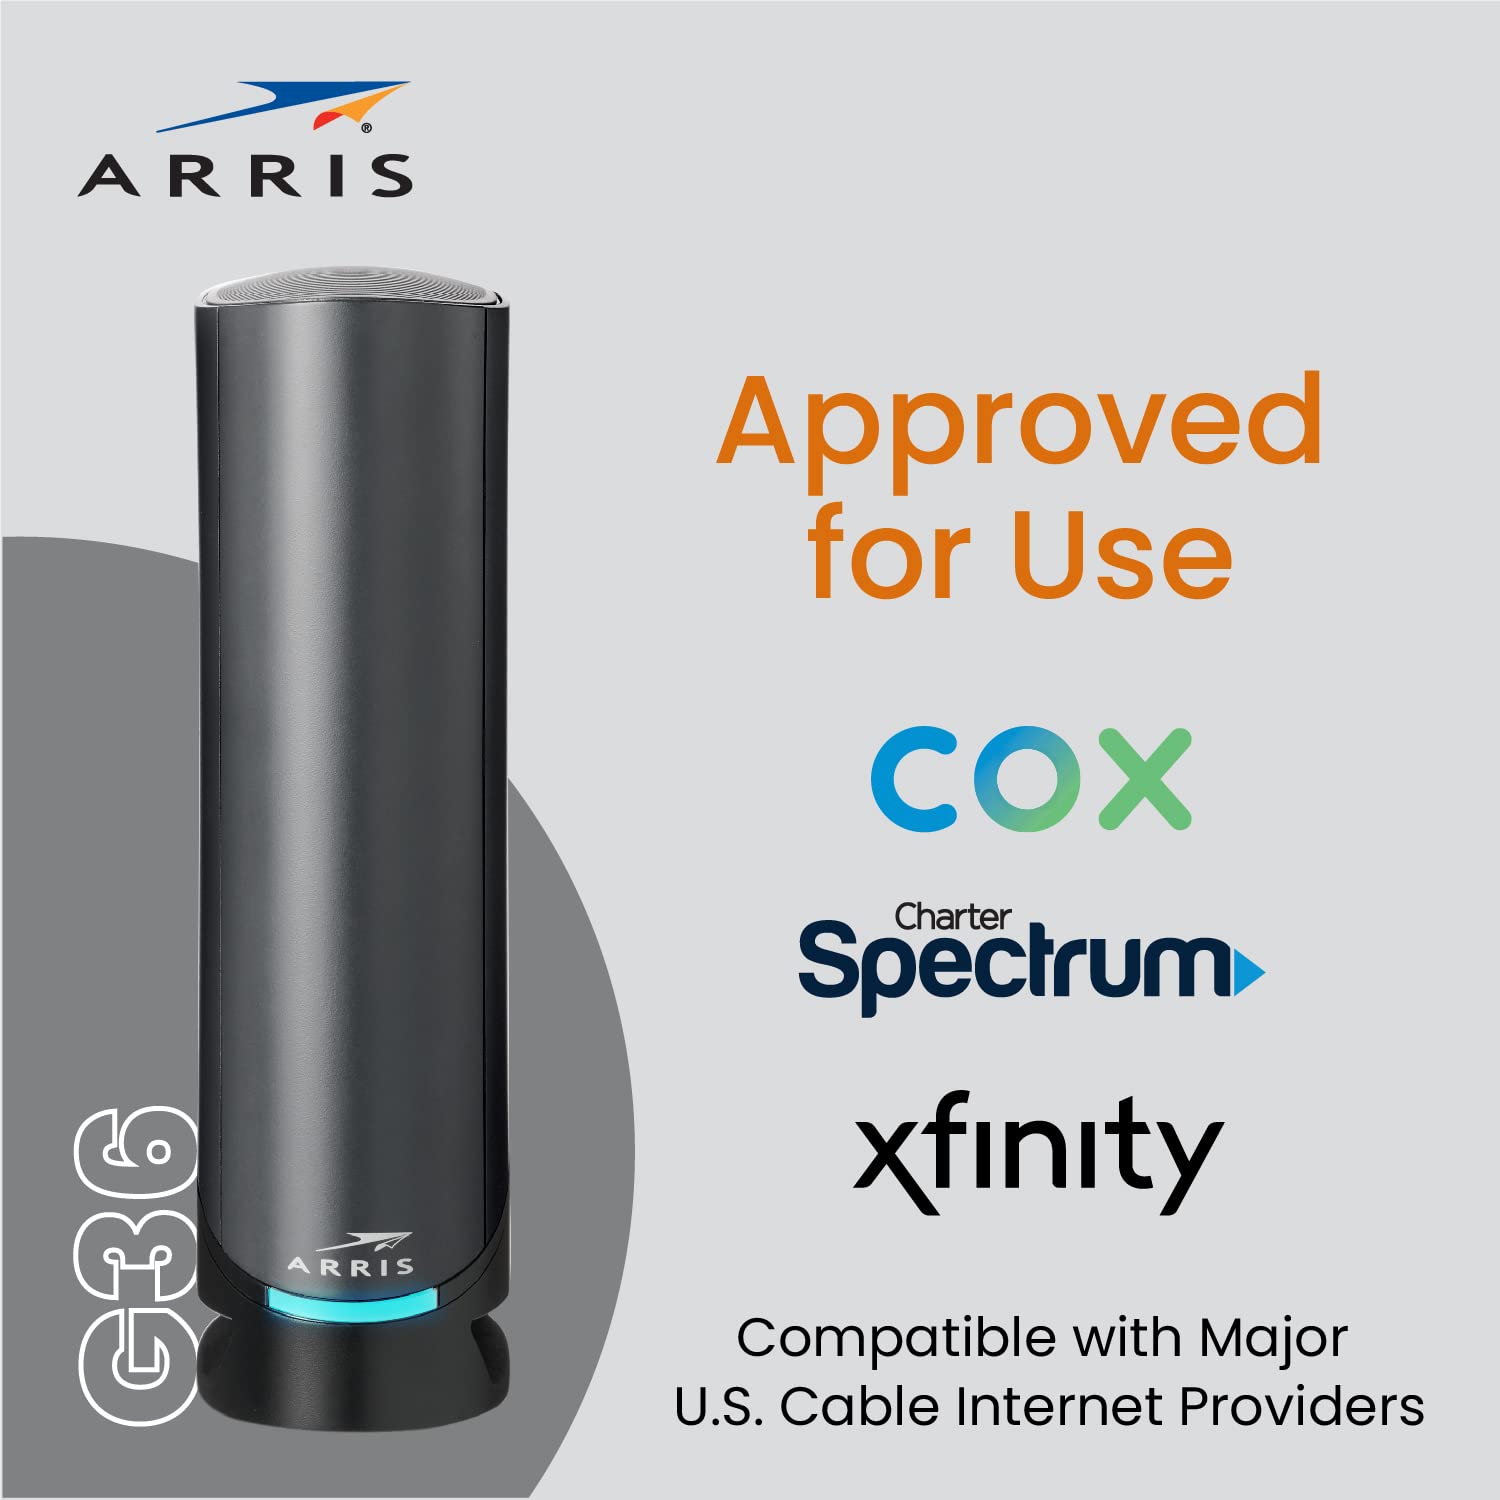 ARRIS Surfboard G36 DOCSIS 3.1 Multi-Gigabit Cable Modem & AX3000 Wi-Fi Router | Comcast Xfinity, Cox, Spectrum| Four 2.5 Gbps Ports | 1.2 Gbps Max Internet Speeds | 4 OFDM Channels | 2 Year Warranty